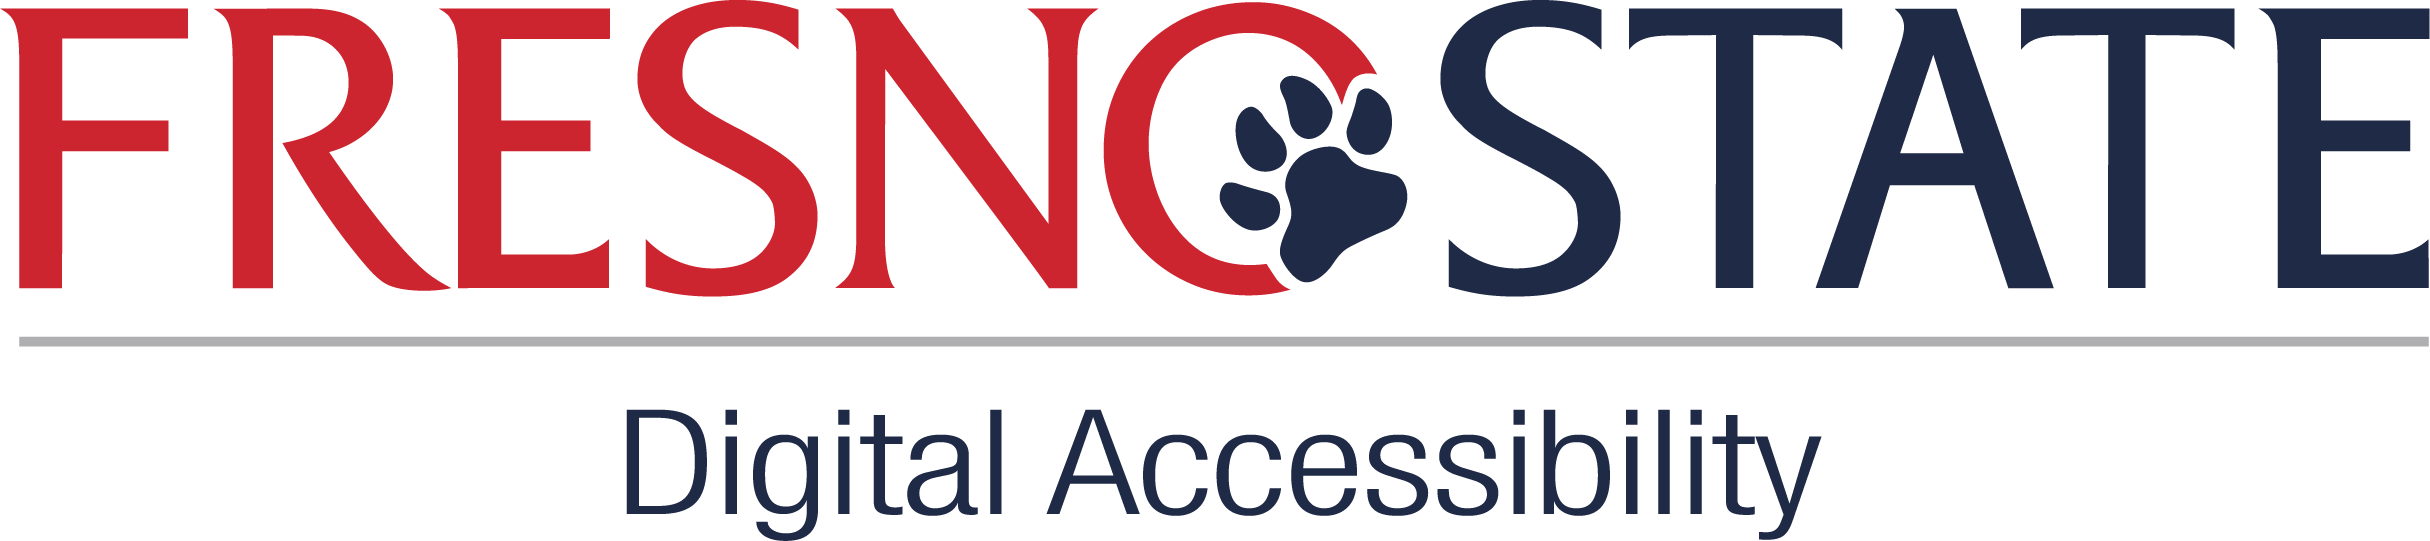 Fresno State Office of Digital Accessibility Logo